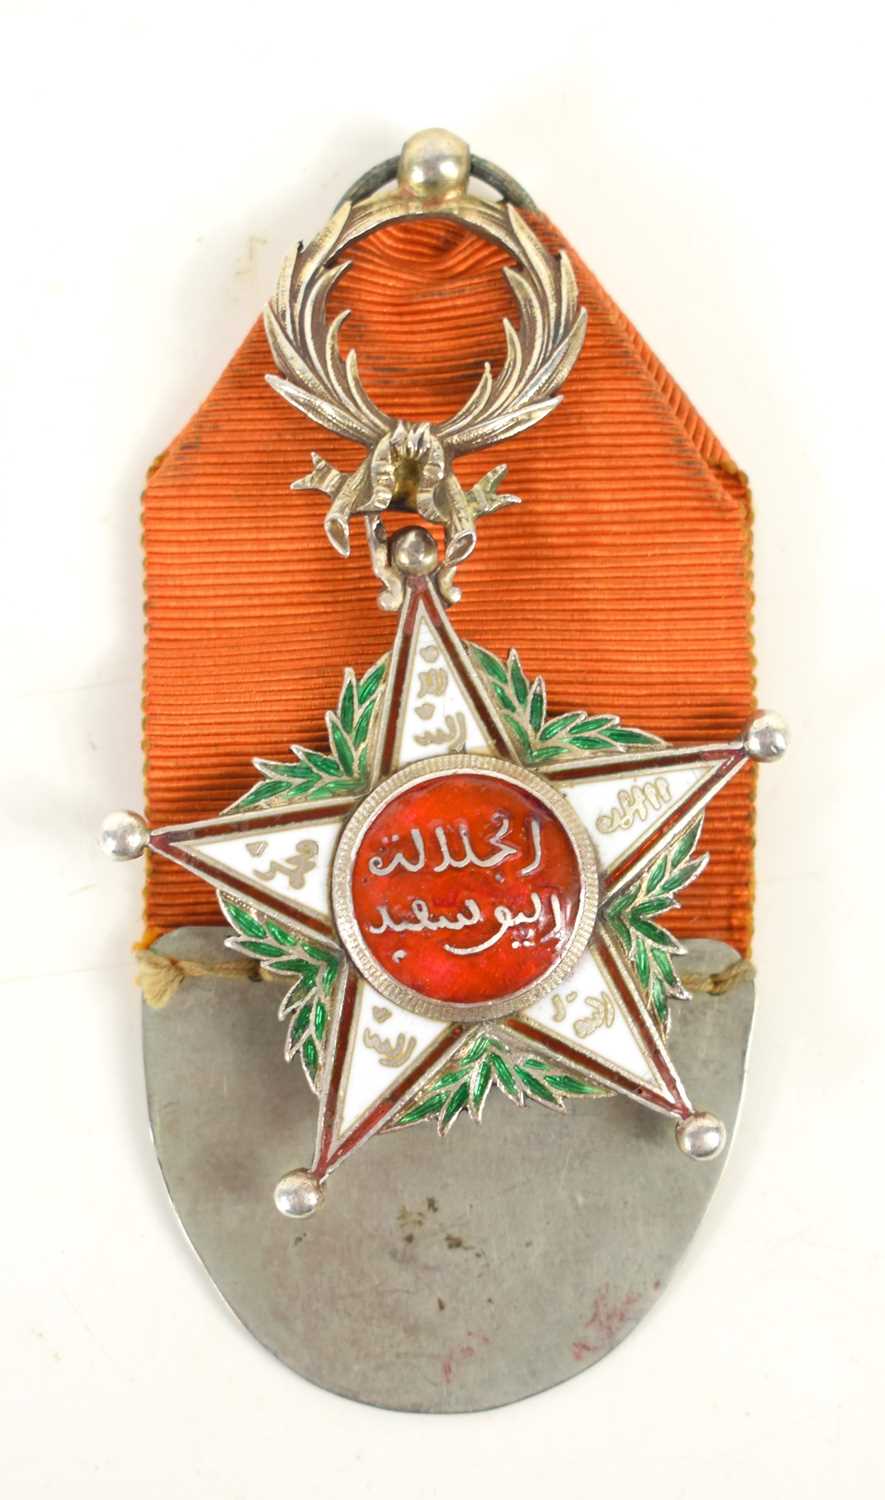 Lot 16 - An Order of Ouissam Alaouite Knights Cross medal.